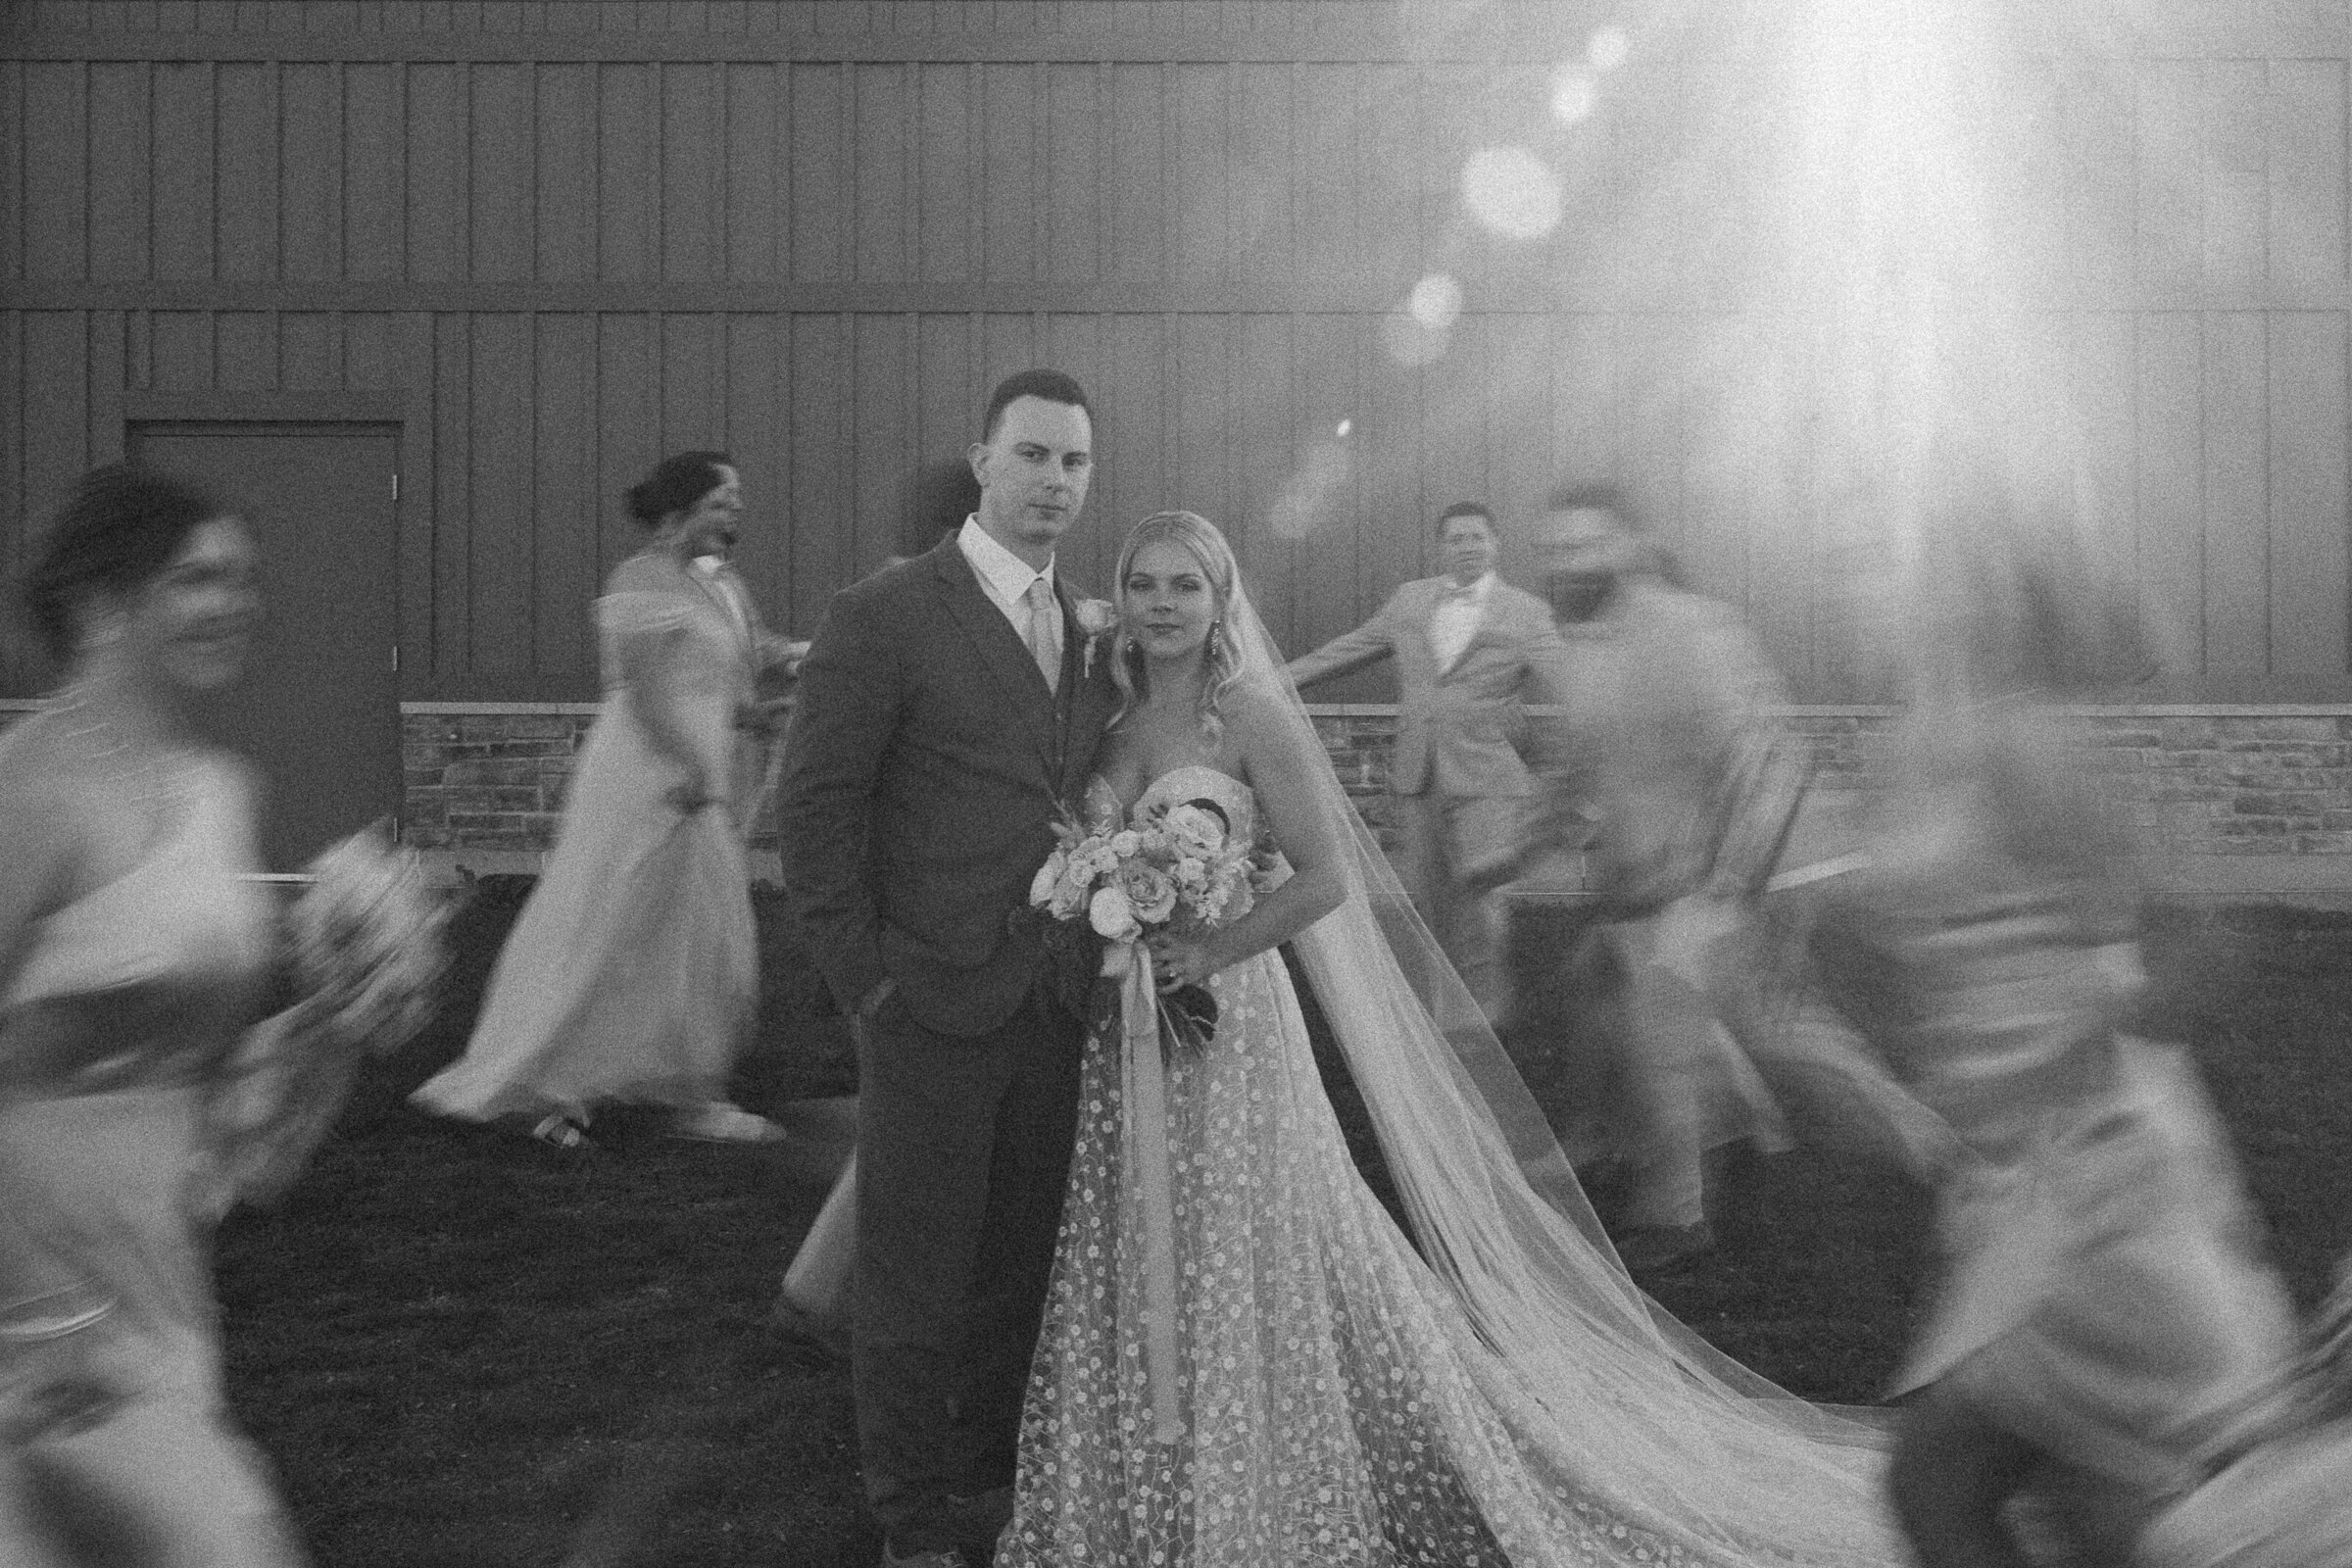 Bride and groom in a blurred motion photo with guests.